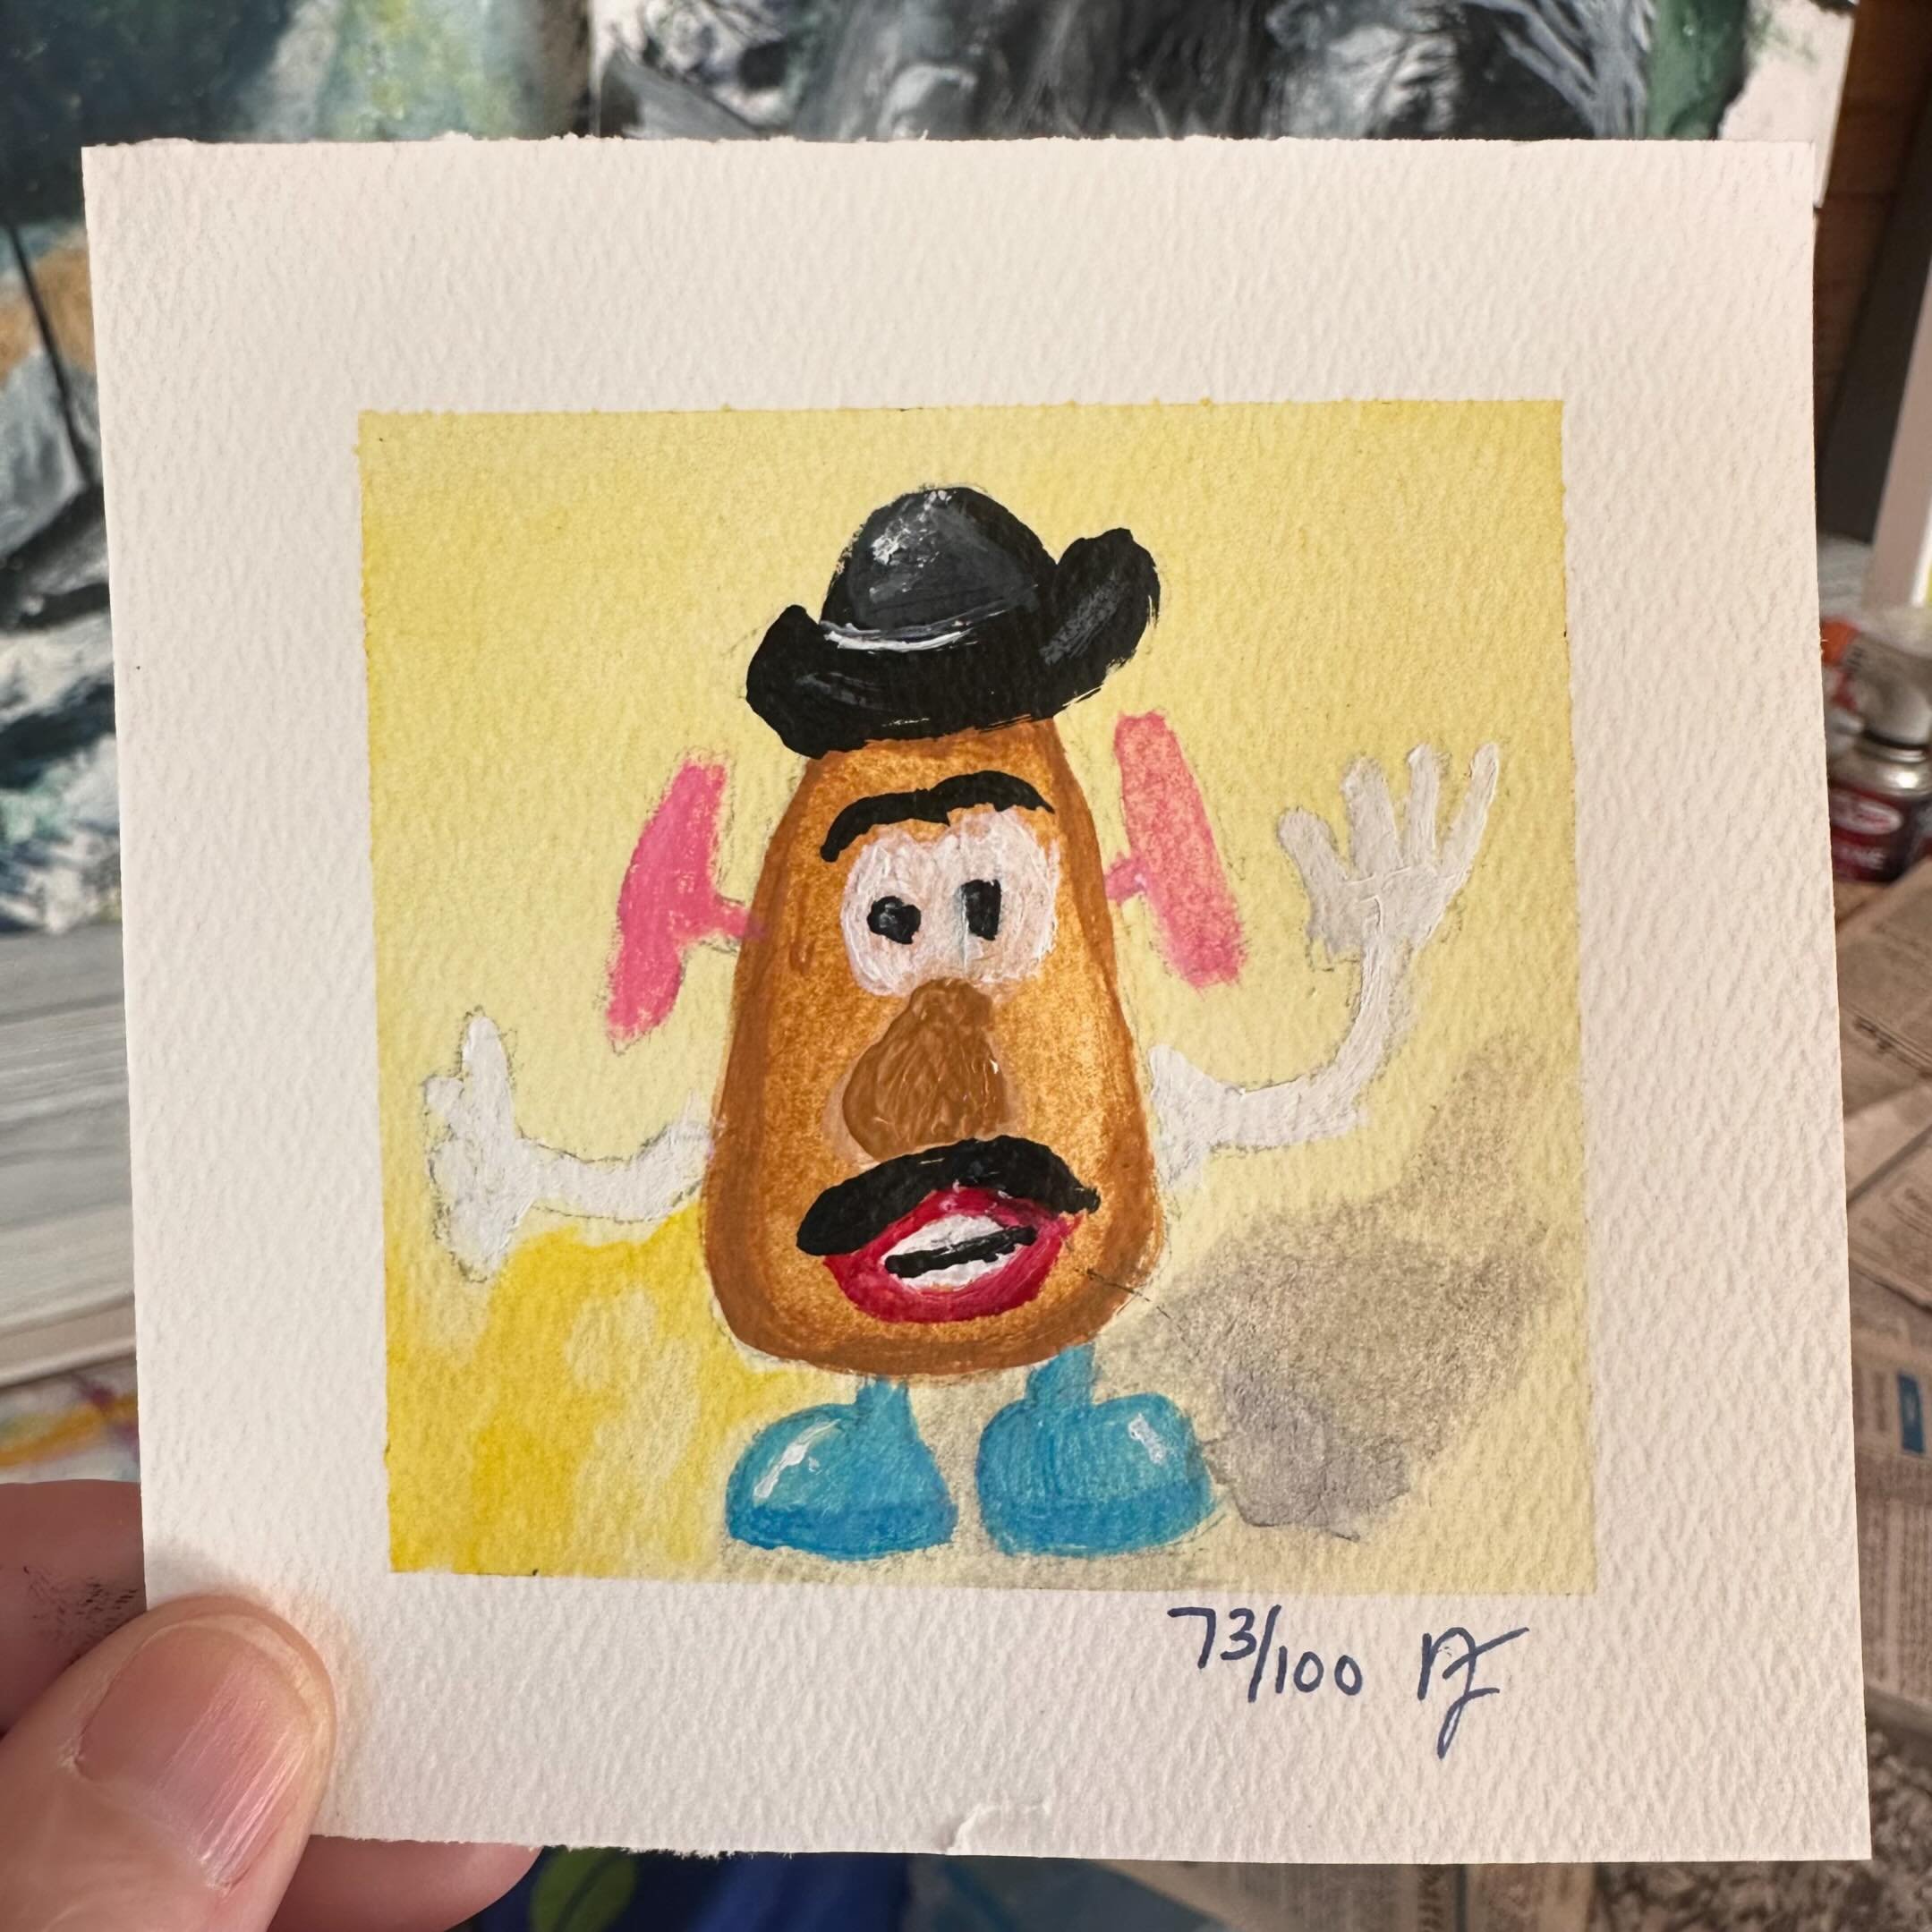 #the100dayproject Day 73! Sticking with the national day theme - today is National Mr Potato Head Day (along with National Bubble Tea - that I was going to do) but I couldn&rsquo;t pass up Mr Potato Head! 😁👃🥸
.
.
#nikkijorgensen #mrpotatohead #nat